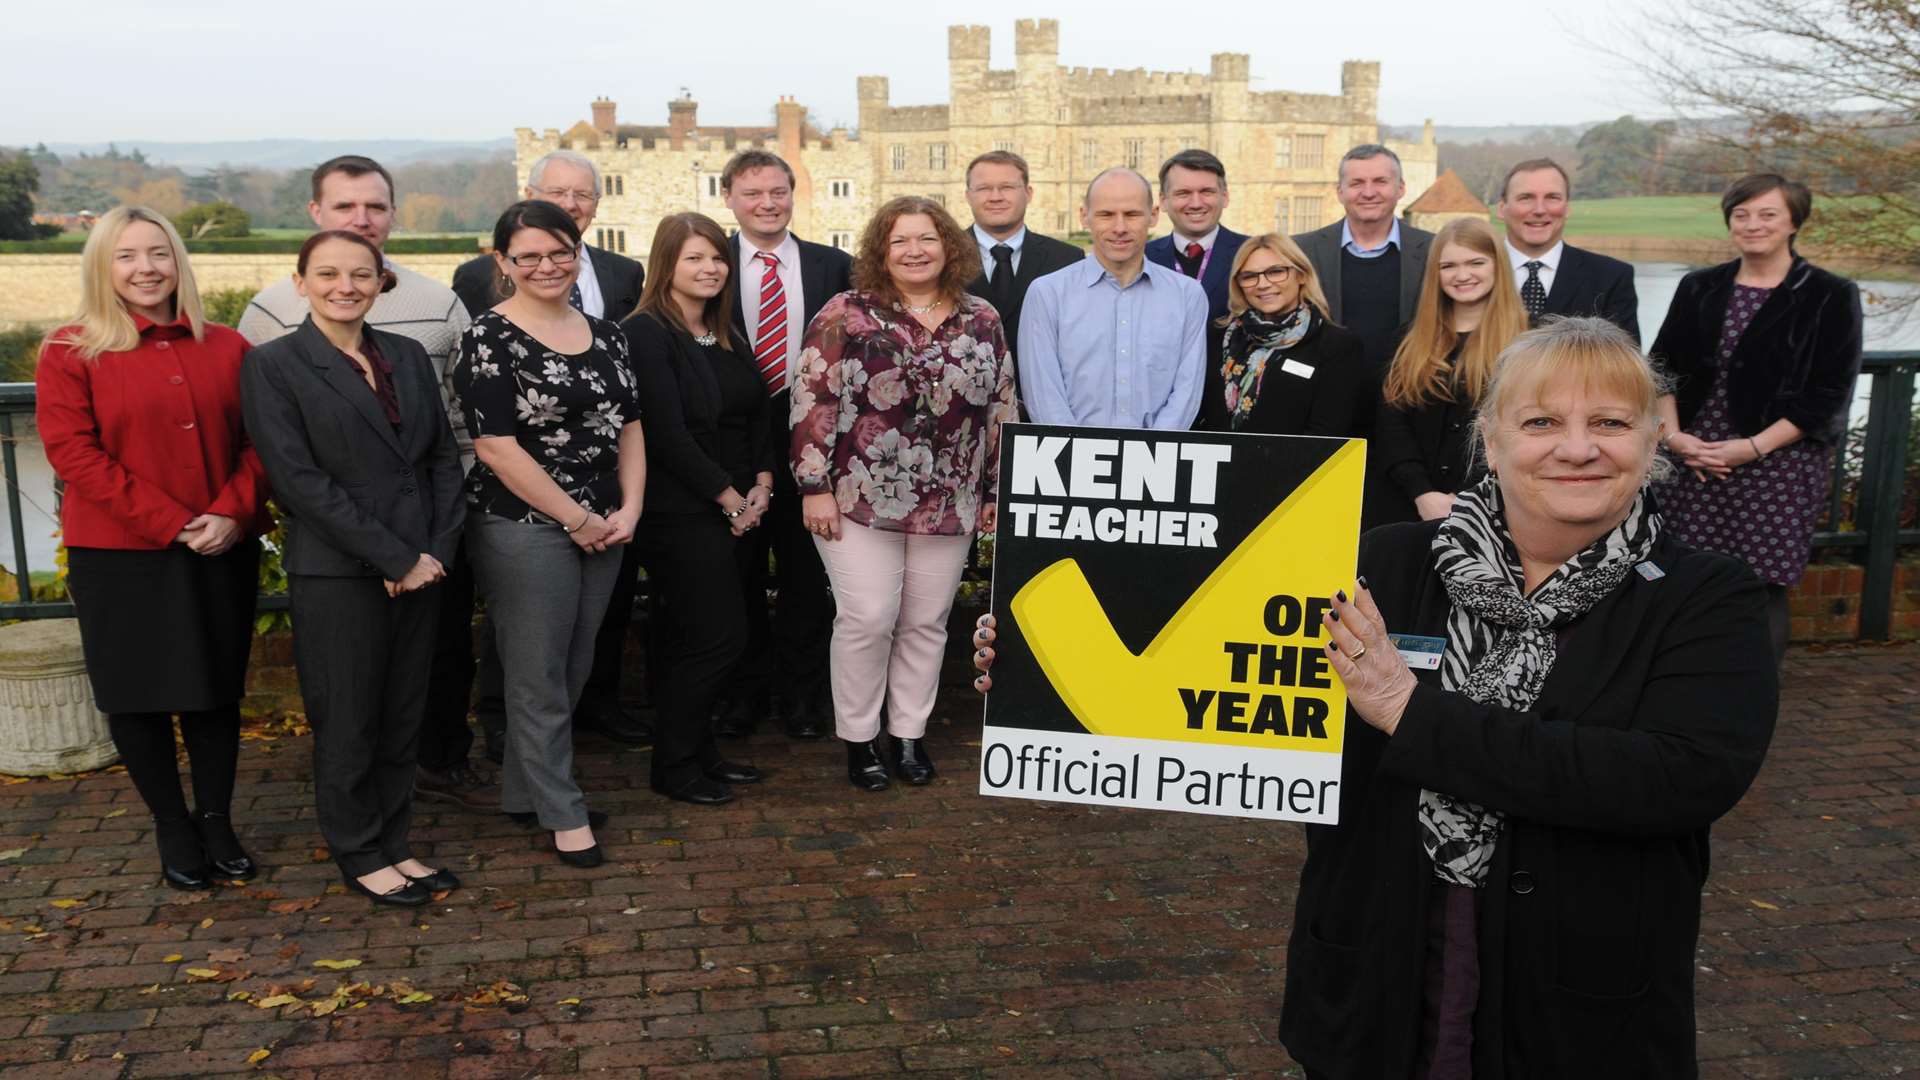 Helen Ellis (front) of Leeds Castle with fellow supporters of the Kent Teacher of the Year Awards: Sally Williamson and Peter Heckel (Project Salus), Amy Woods (3R's), Rebecca Smith (Social Enterprise Kent), Mike O'Brien (Medway Council), Carolyn Dool (Kent Sport), Alex Ffrench and Alyson Howard (William Giles Chartered Accountants, Colin Smith (Brachers Law), Gavin Mountjoy (School of Physical Sciences), Craig Garton (CXK), Catherine Carden (Canterbury Christchurch), Martin Ridout (School of Mathematics, Statistics and Actuarial Sciences), Dr Anthony Baines (School of Biosciences) and Nicola Podd (SELT).